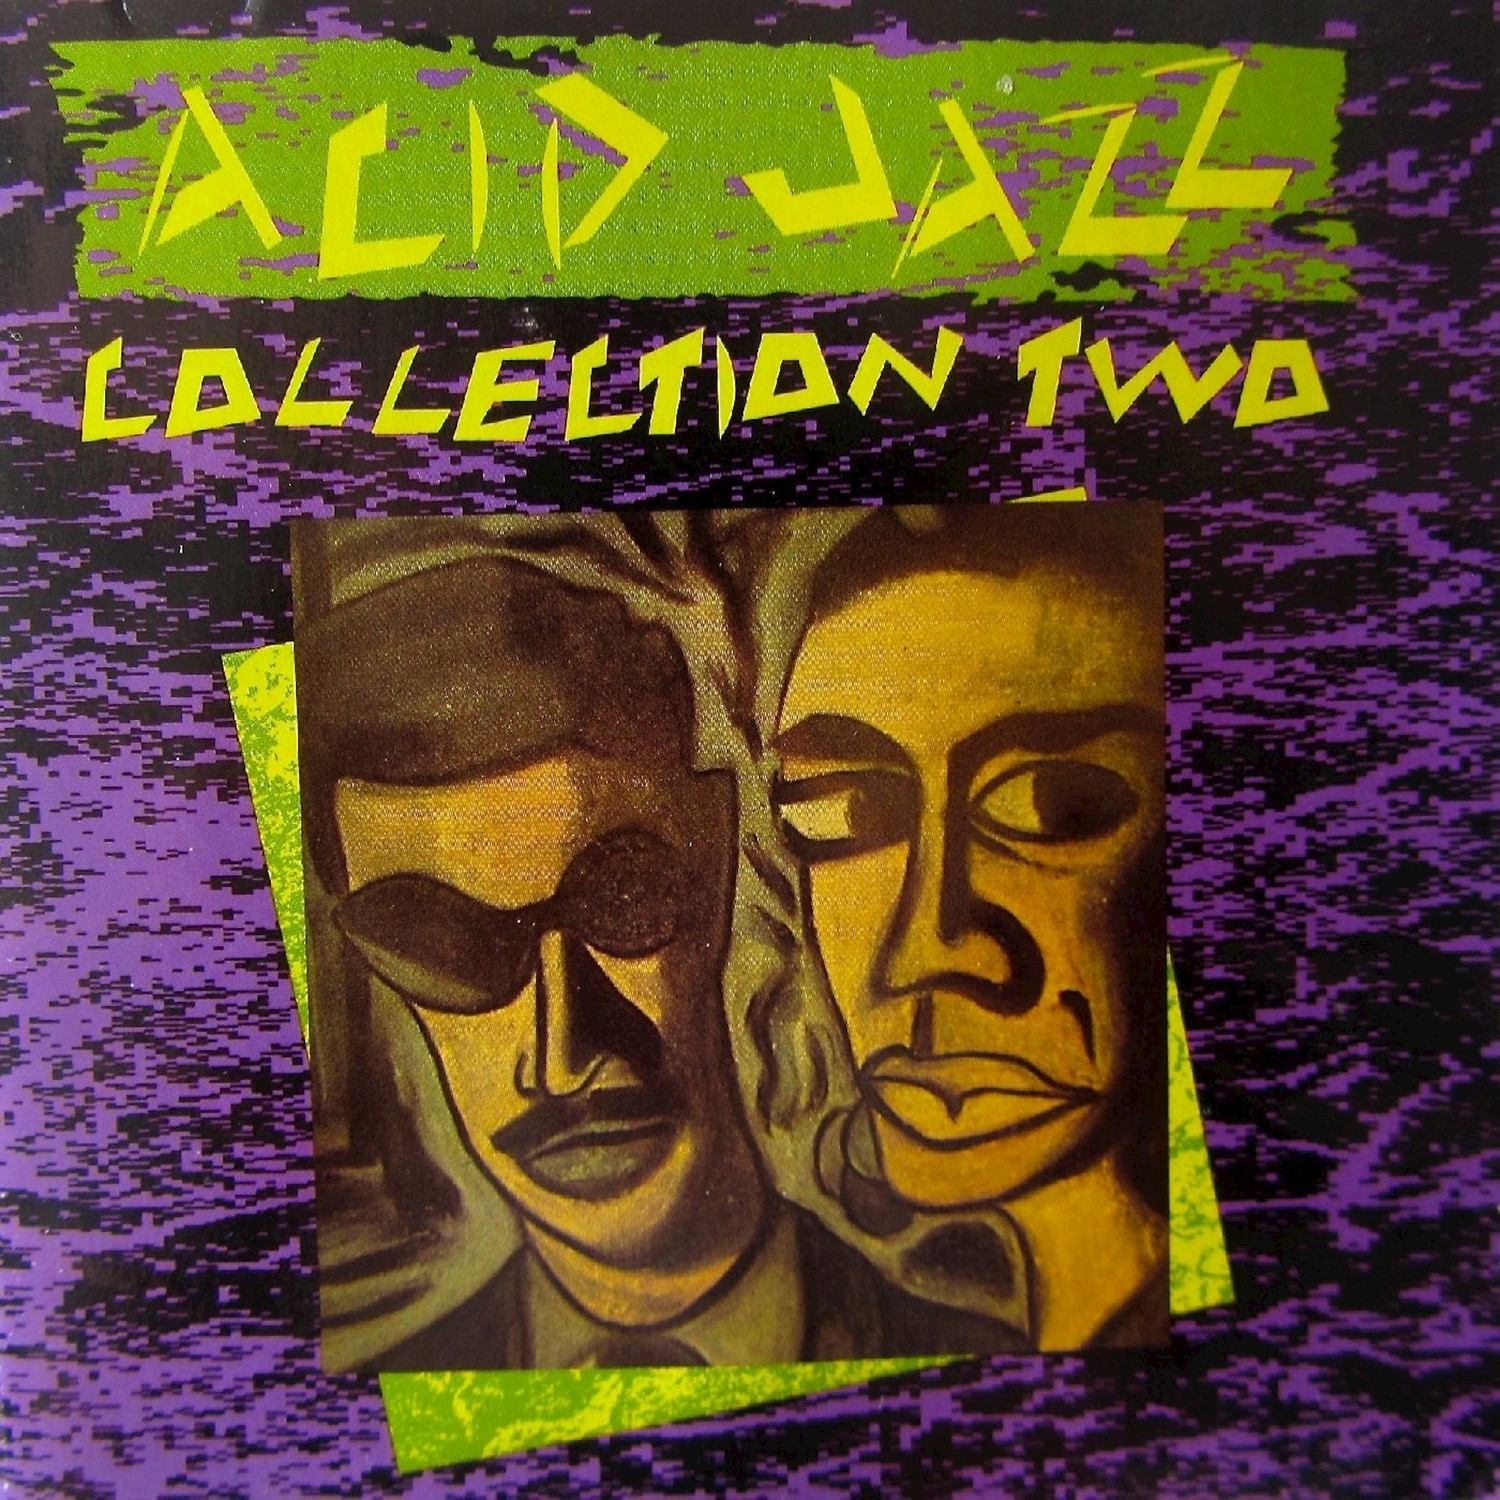 Acid Jazz Collection Two